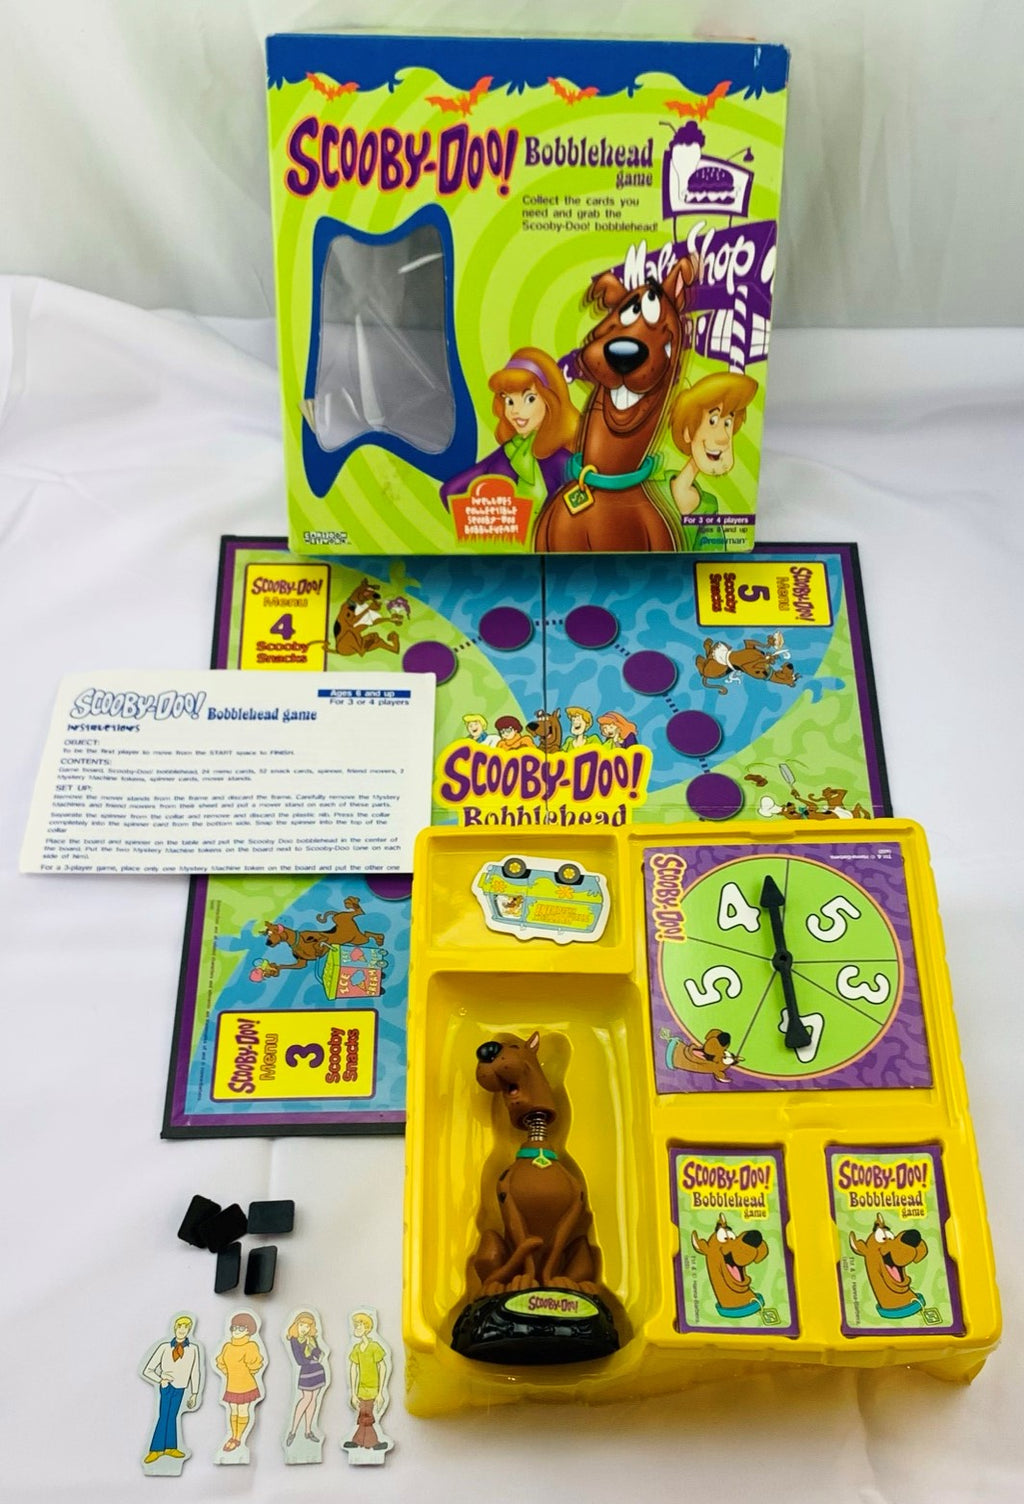 Custom Game Boxes Increase Product Presence